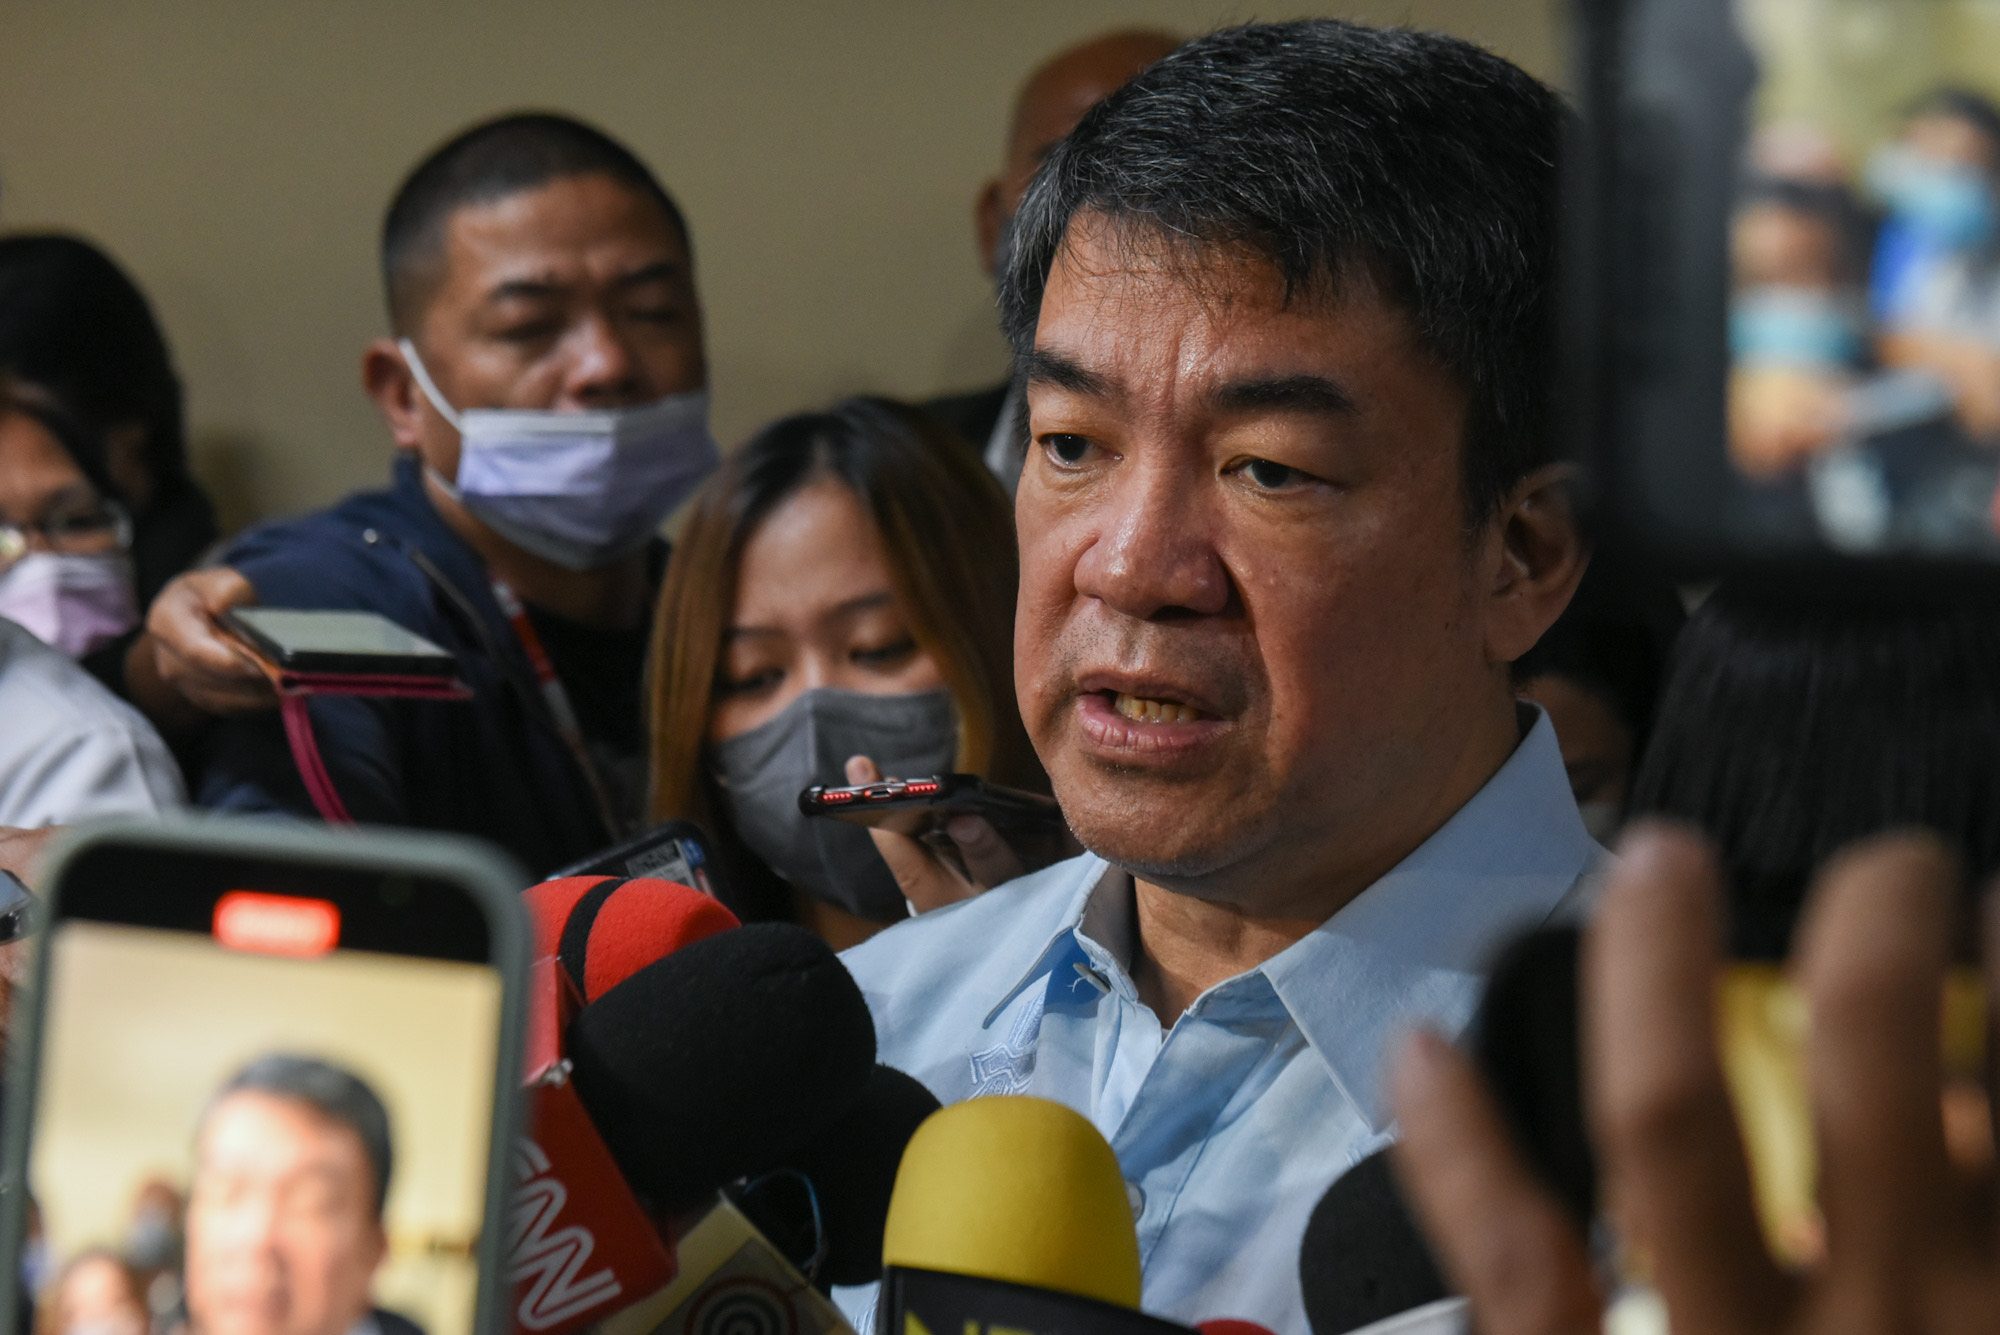 At DILG budget hearing, Pimentel highlights need to evaluate NTF-ELCAC